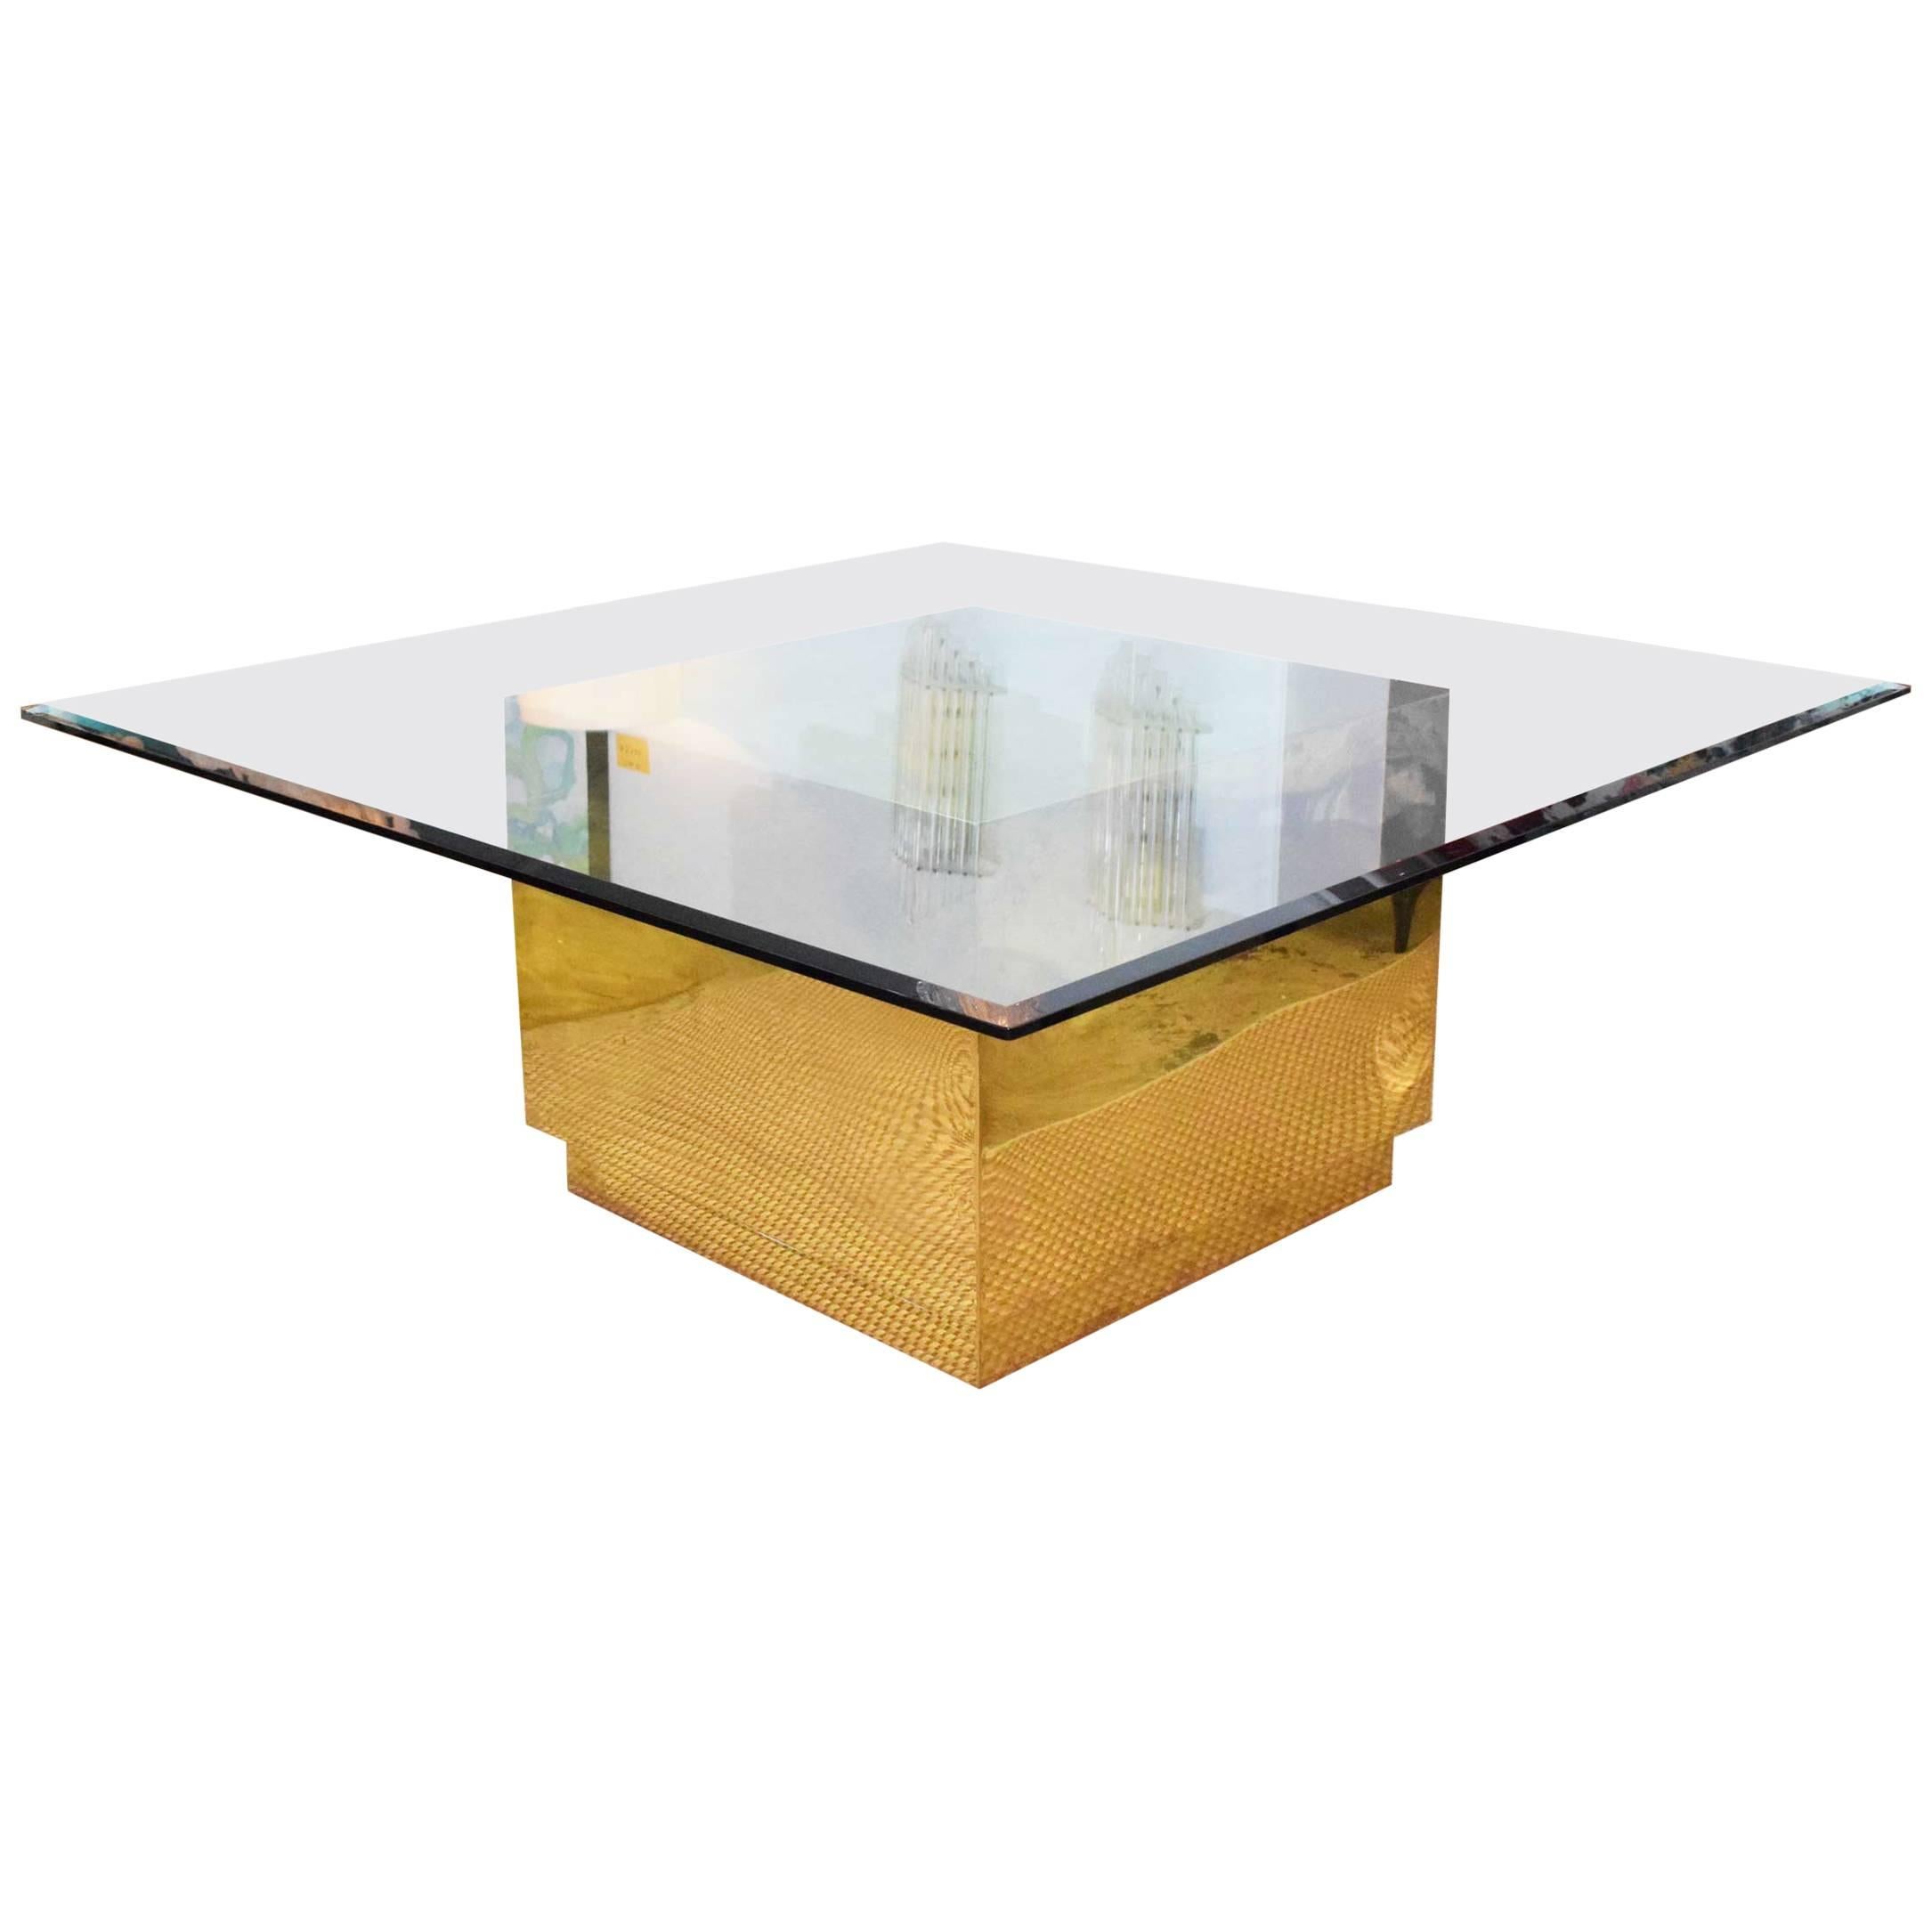 Large Brass Block Base Dining Table